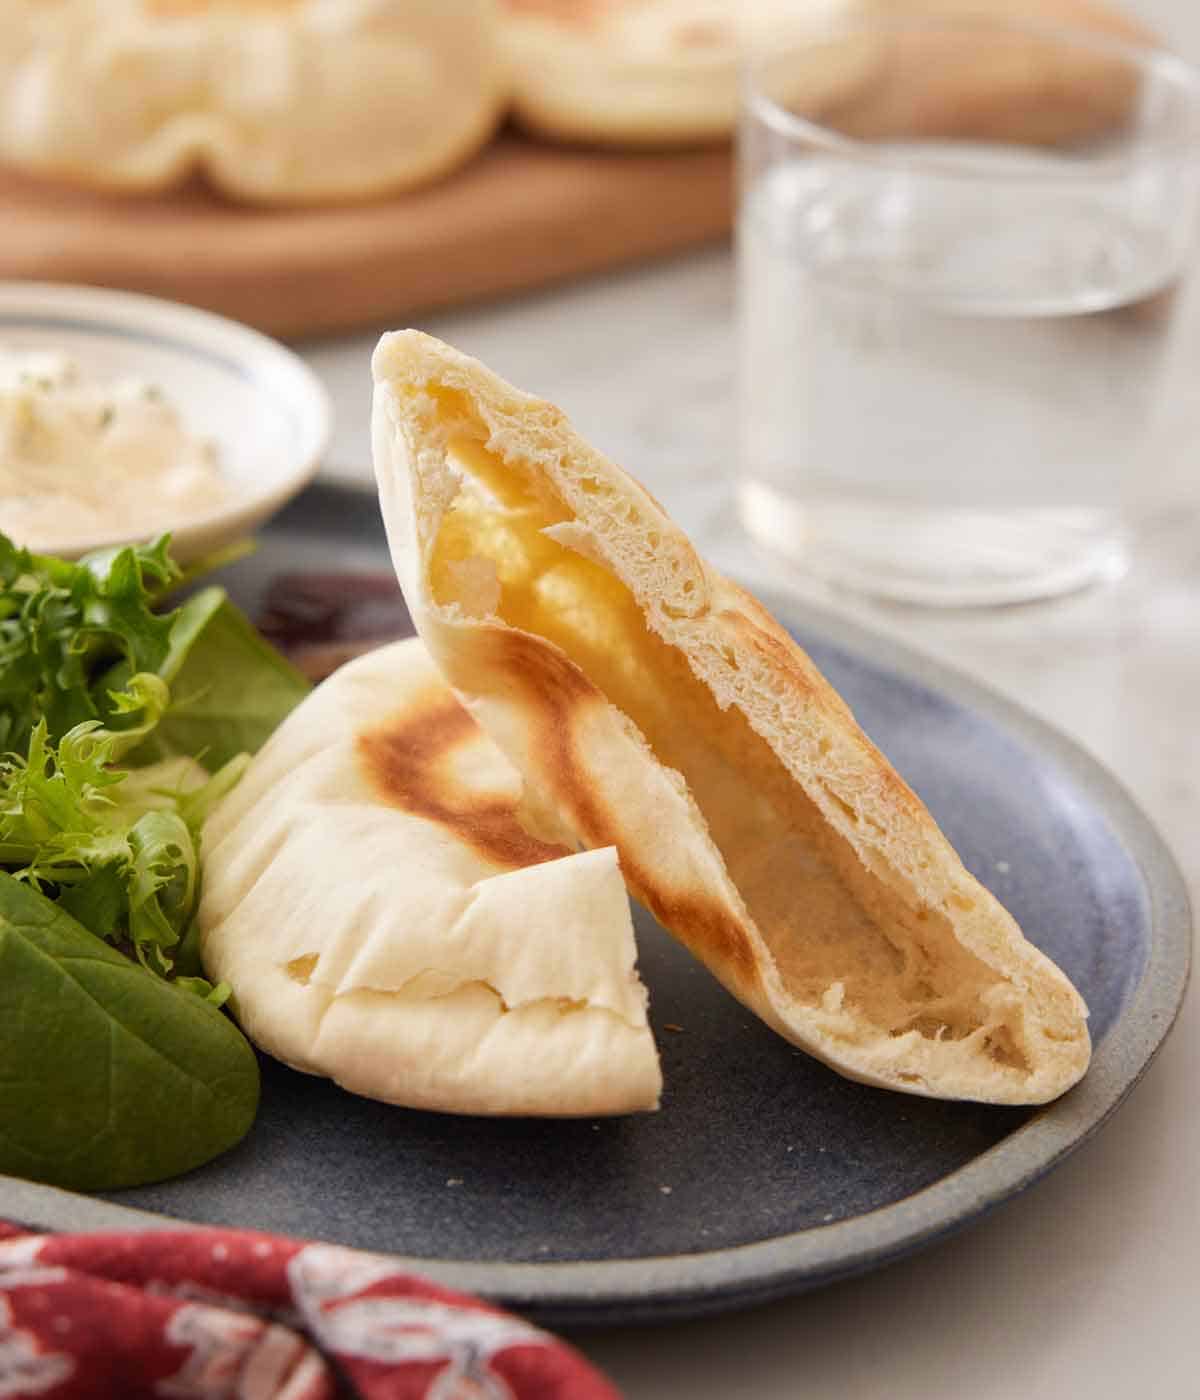 A plate with a pita bread cut in plate, showing the hollow inside.